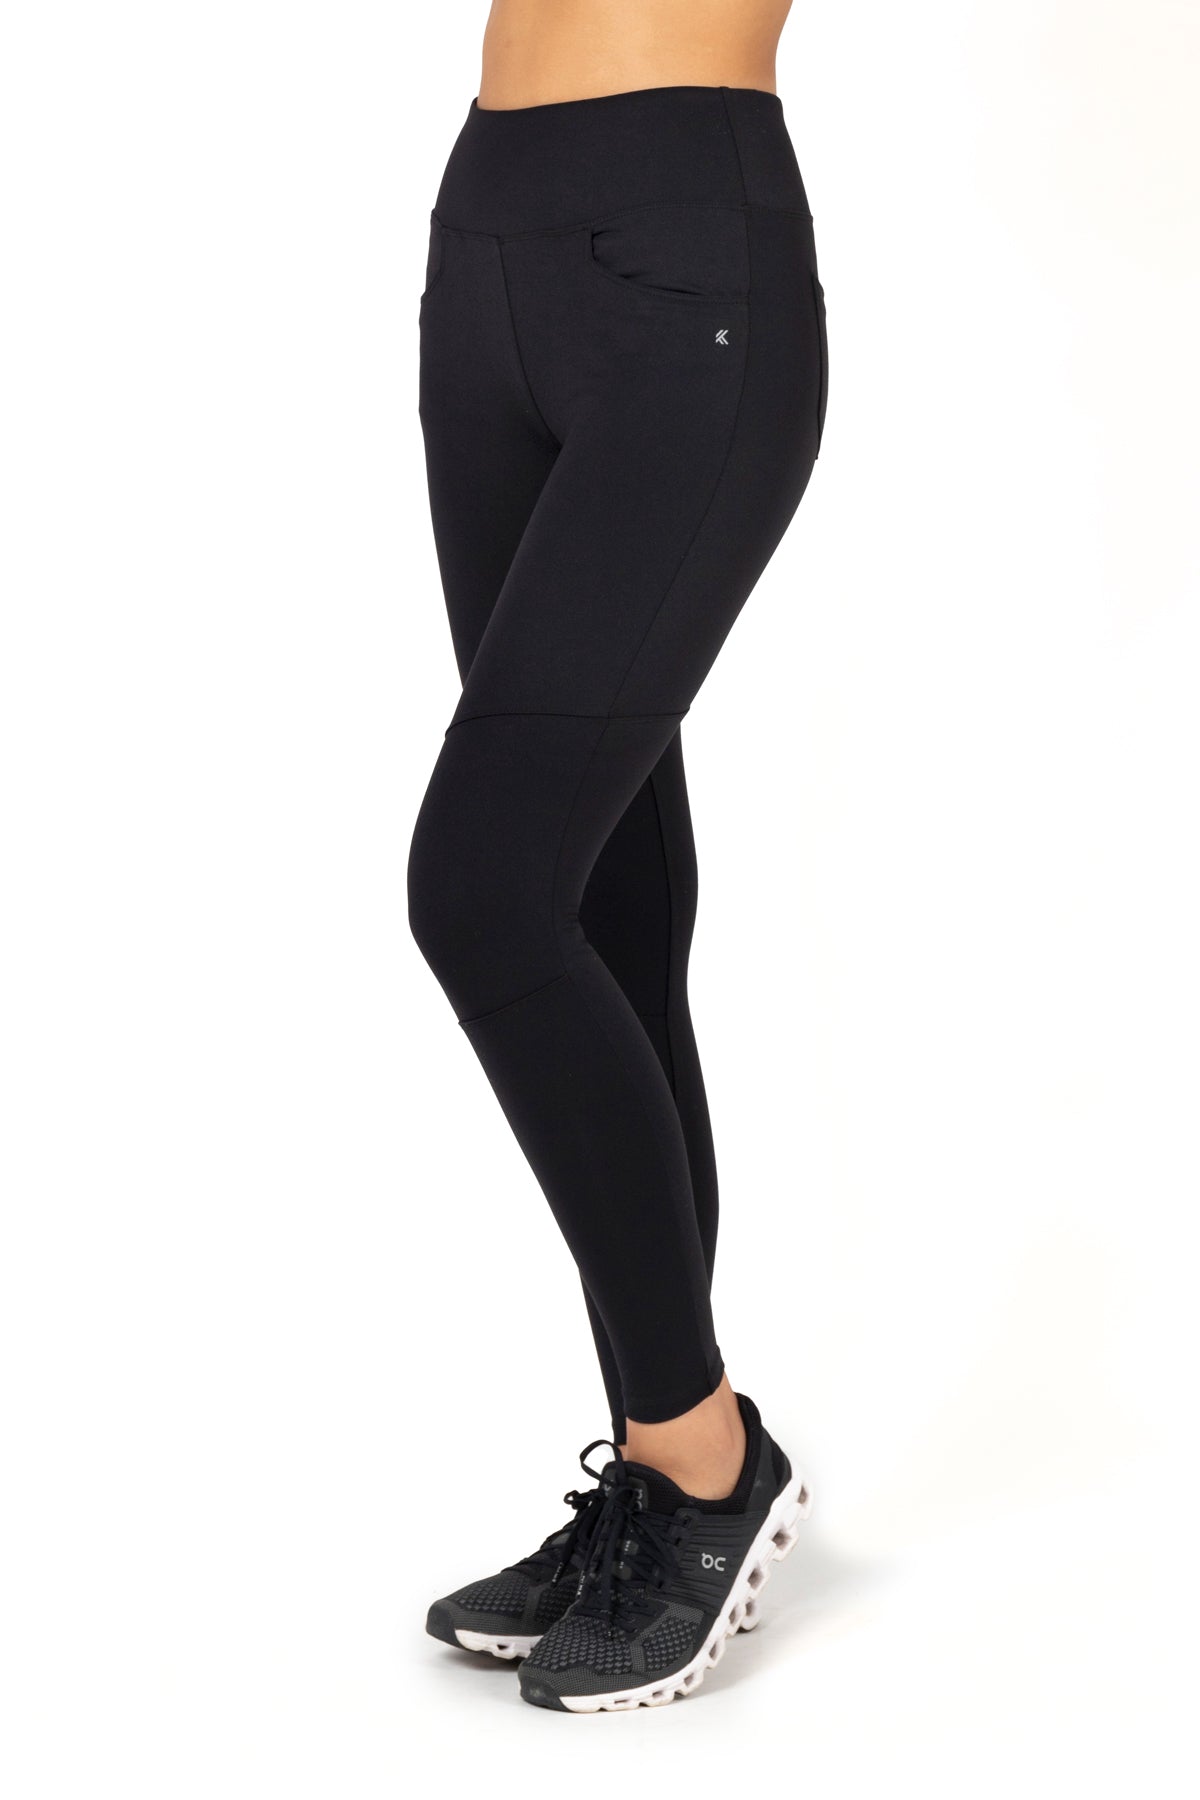 Women Gym Wear Plus Size Fitness Clothing Yoga Set With Pockets Wear  Embryform, by Japanshopees